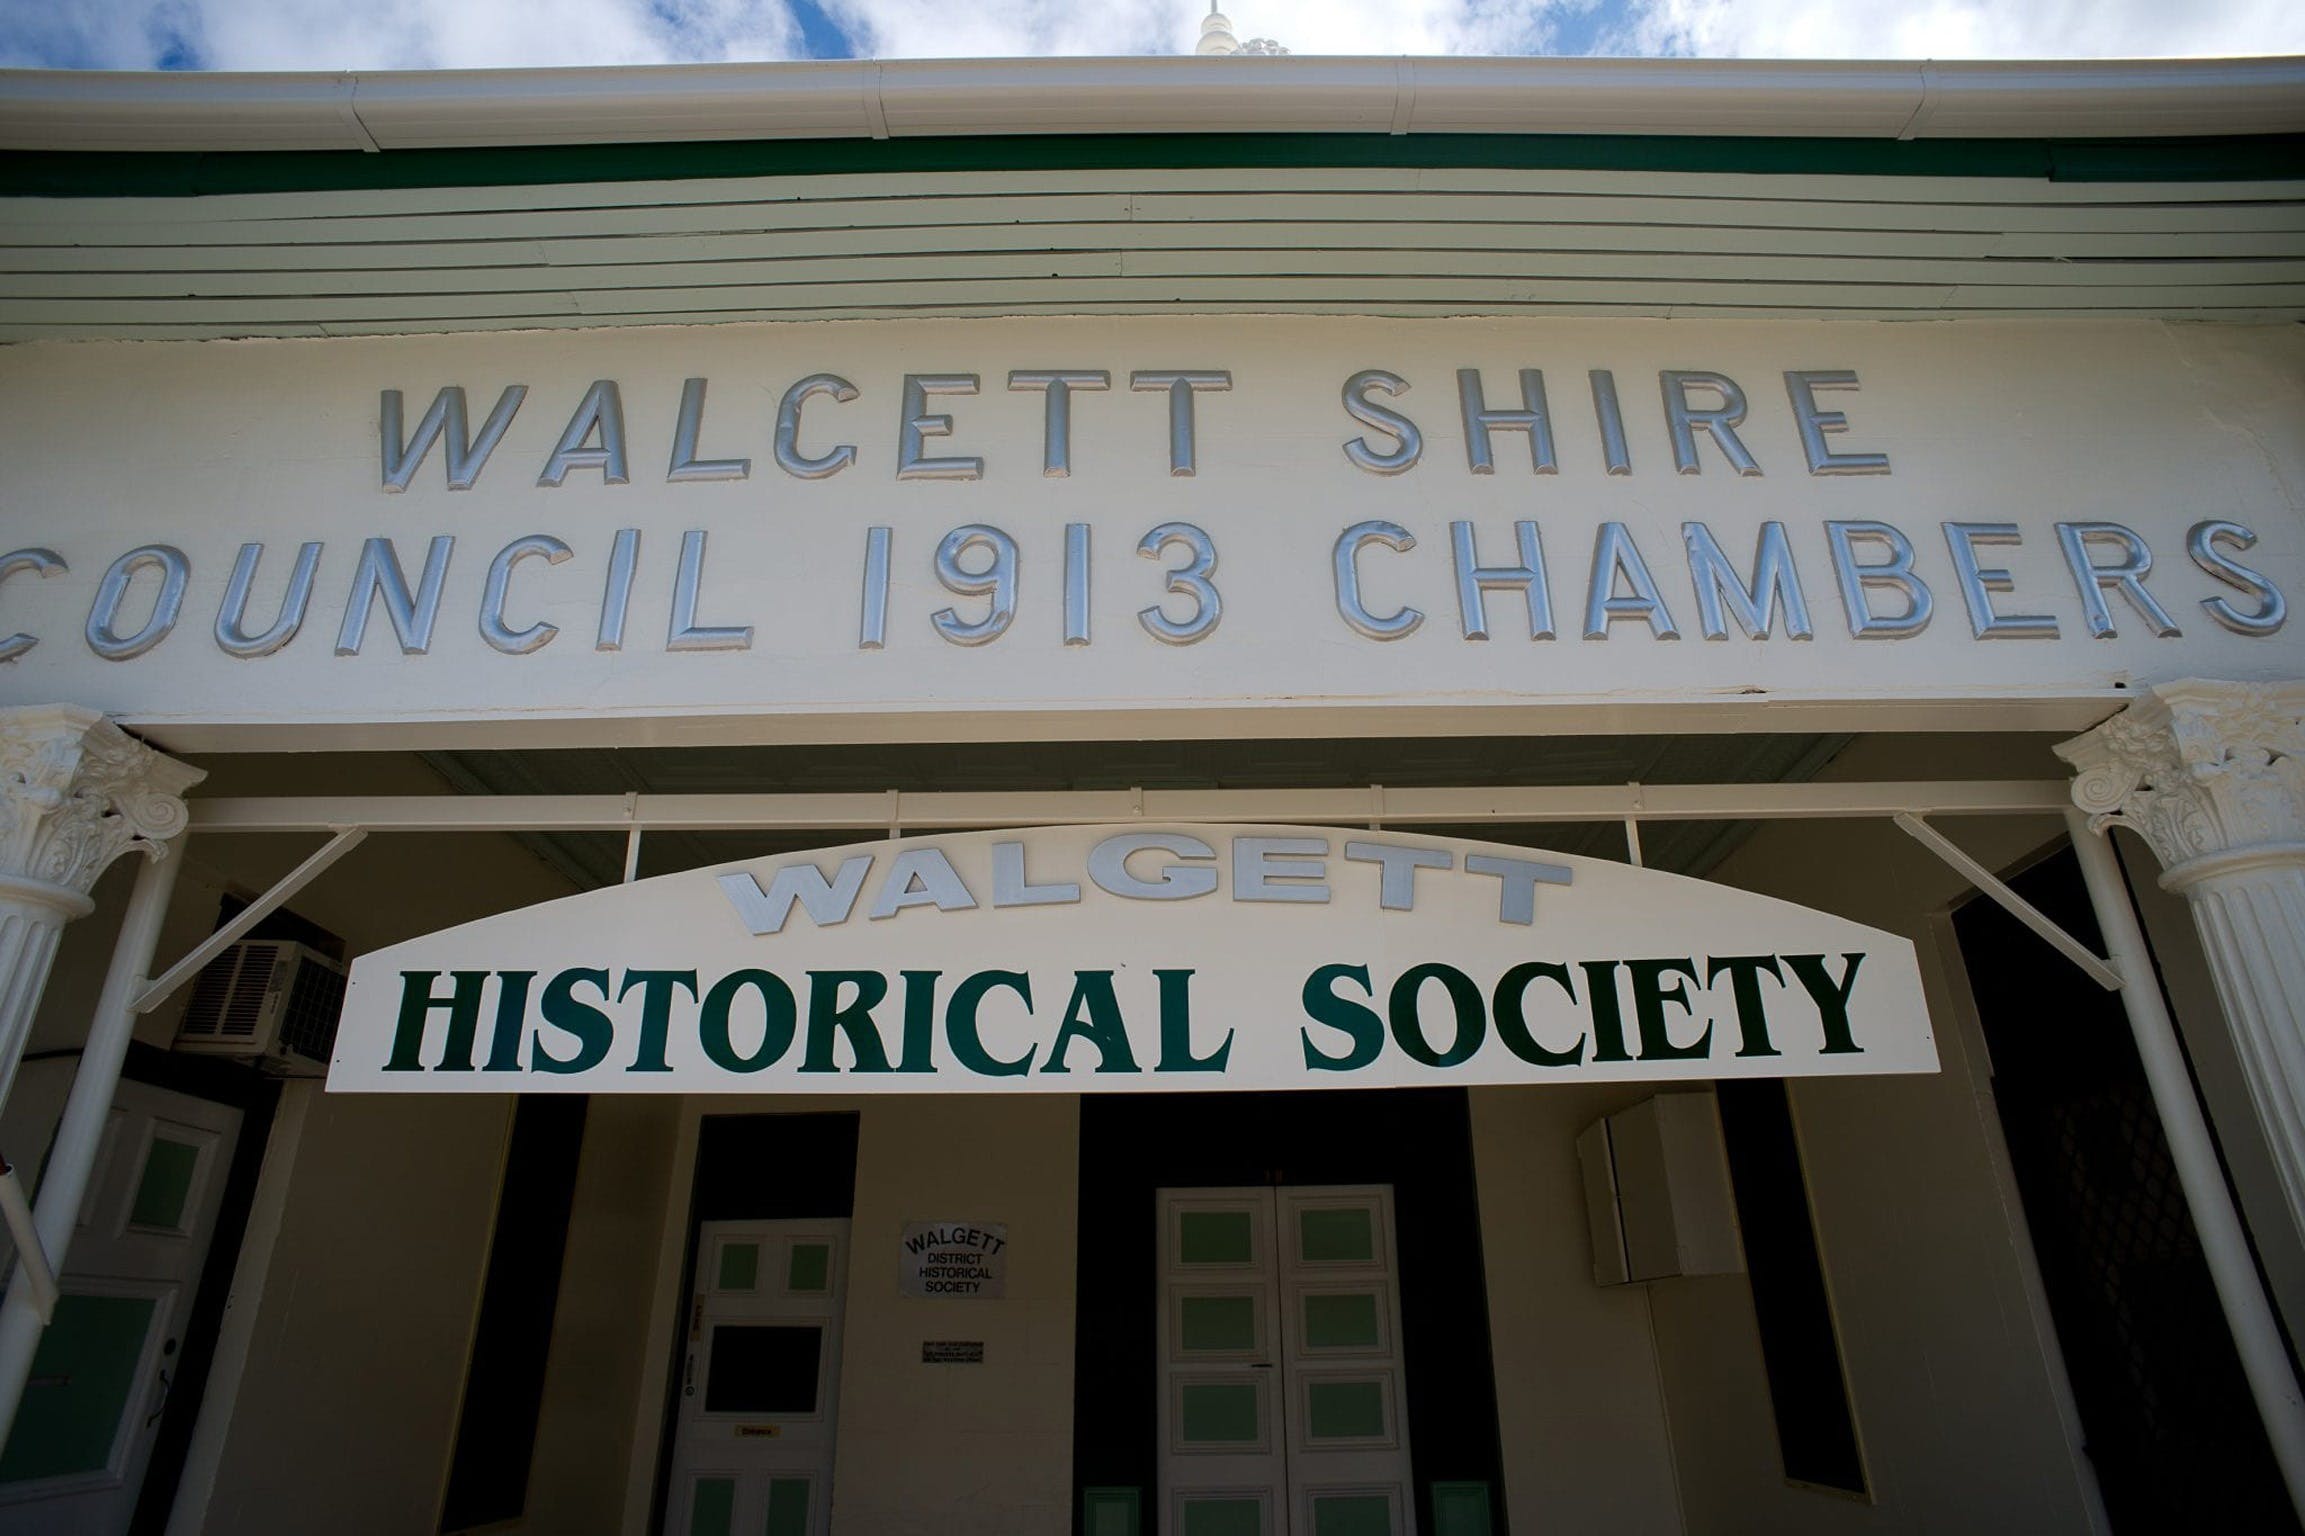 Walgett Historical Society - Find Attractions